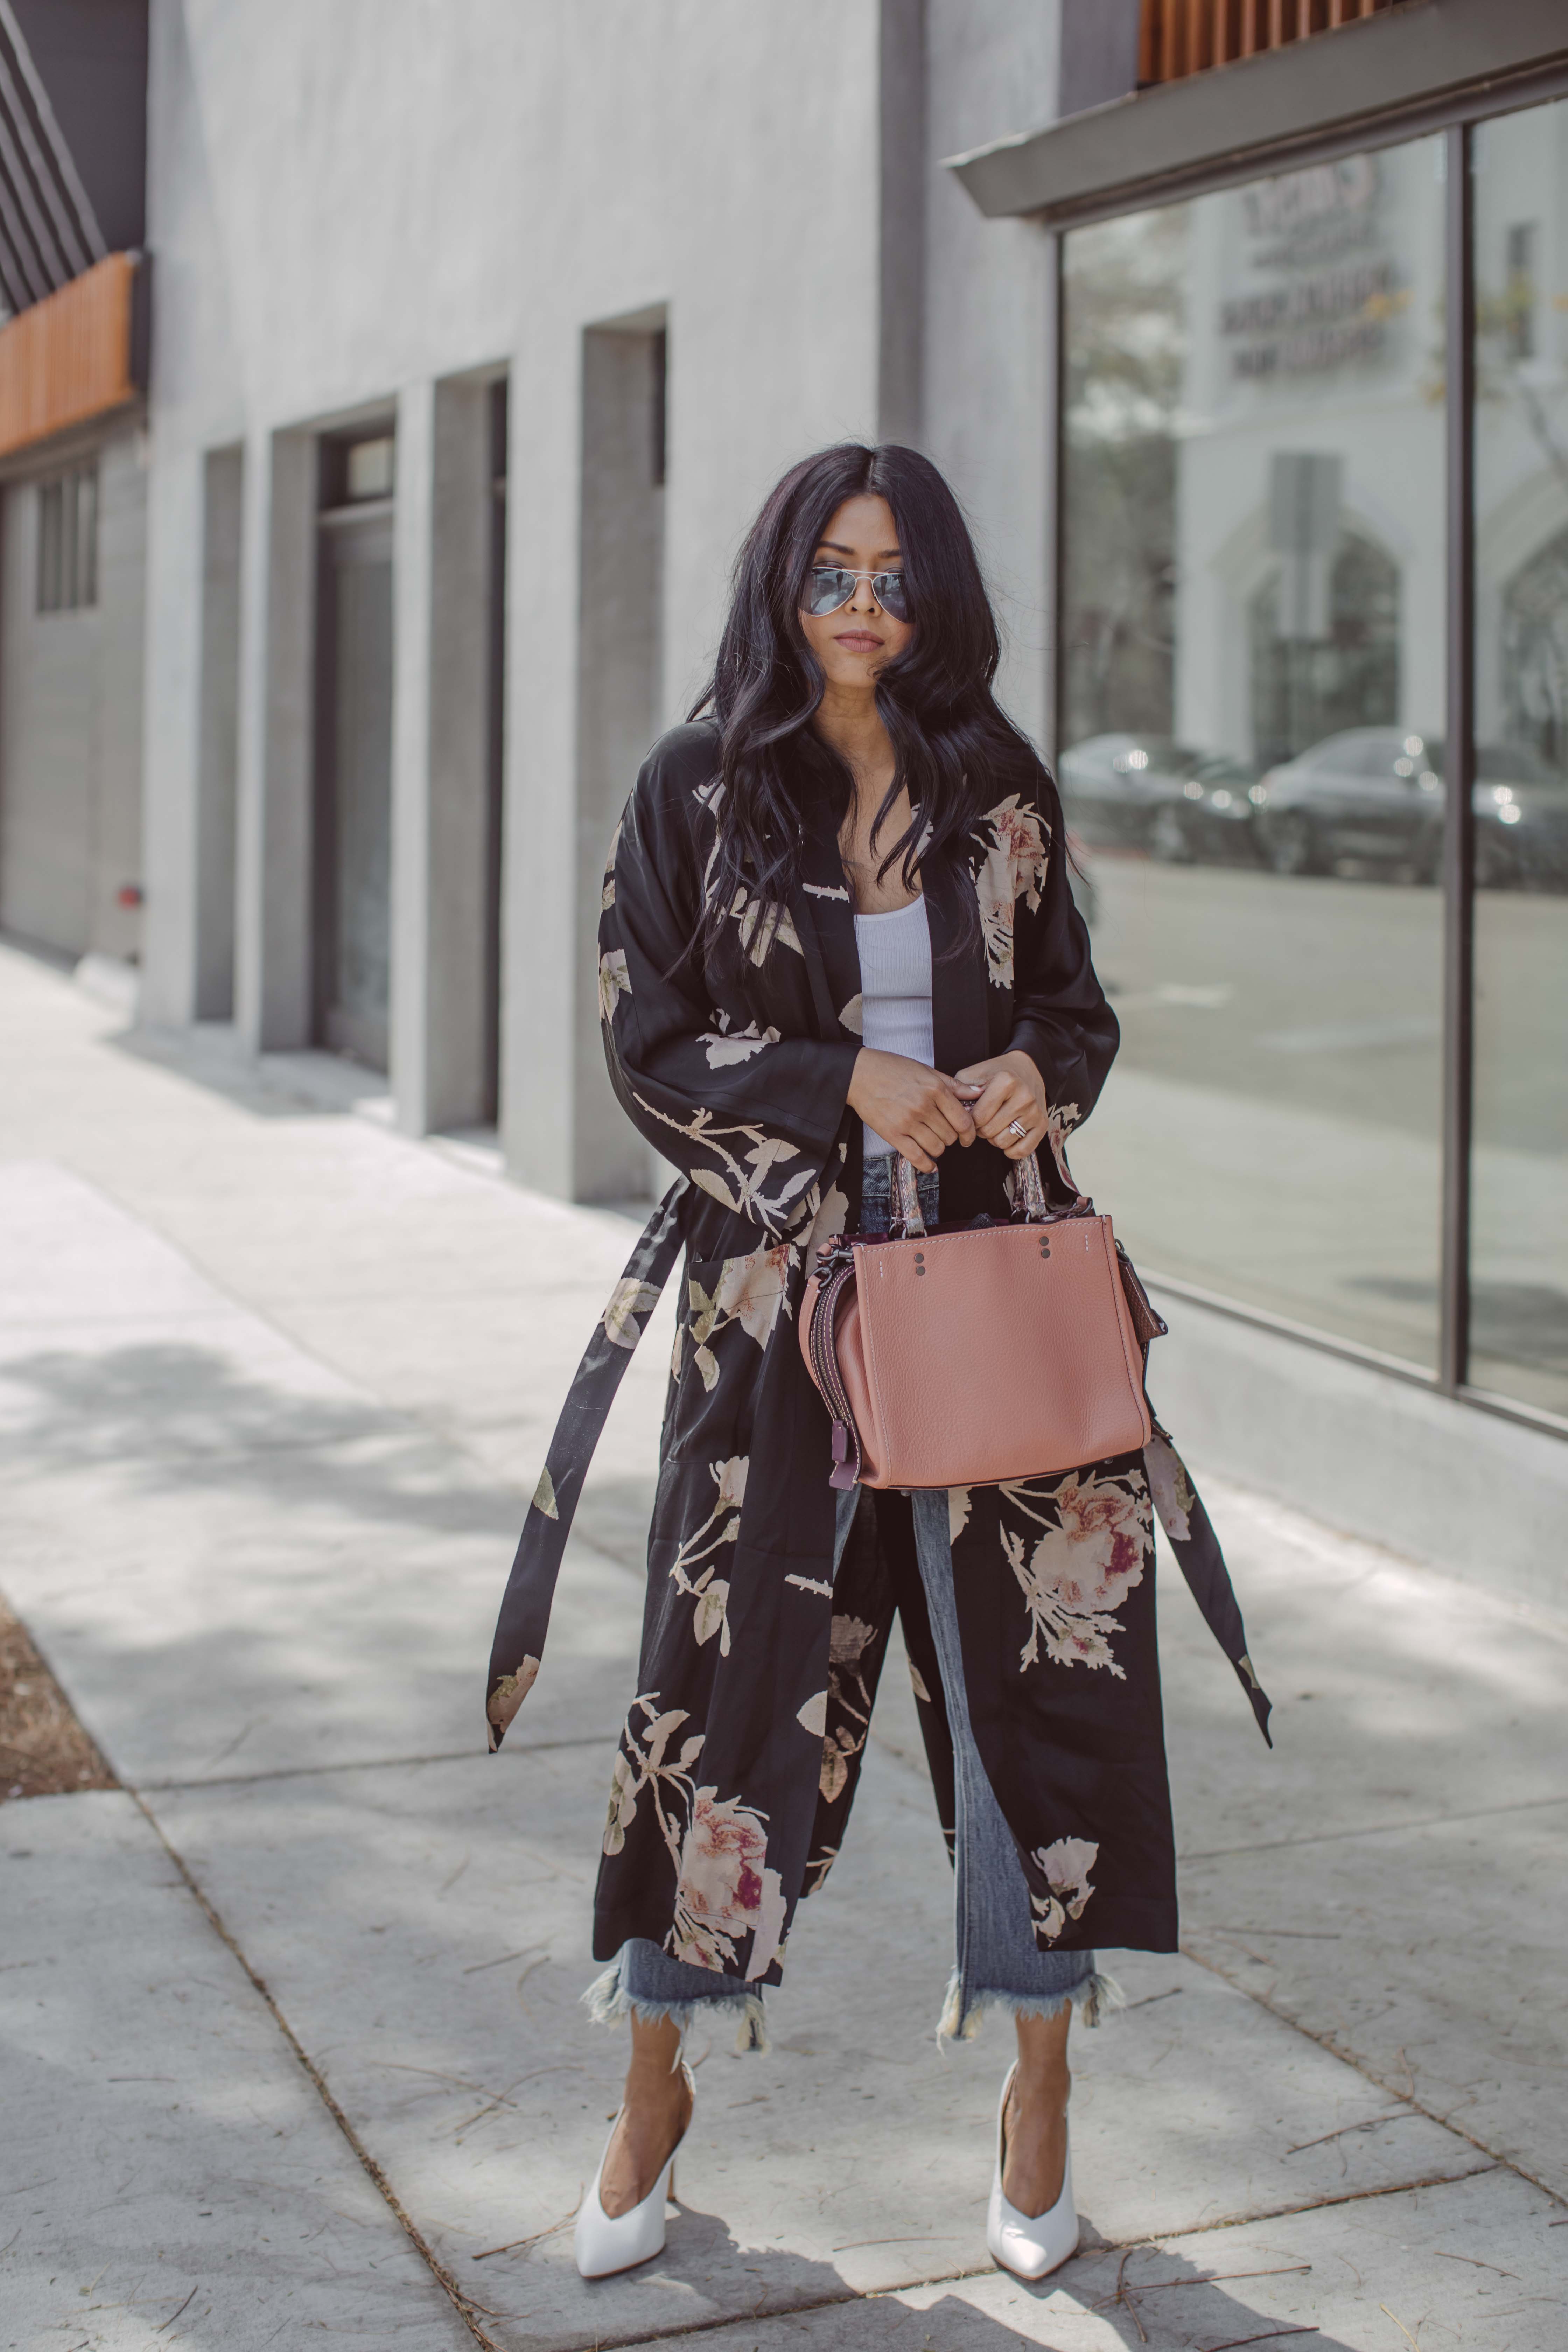 Walk In Wonderland wearing Floral Duster and White Pumps